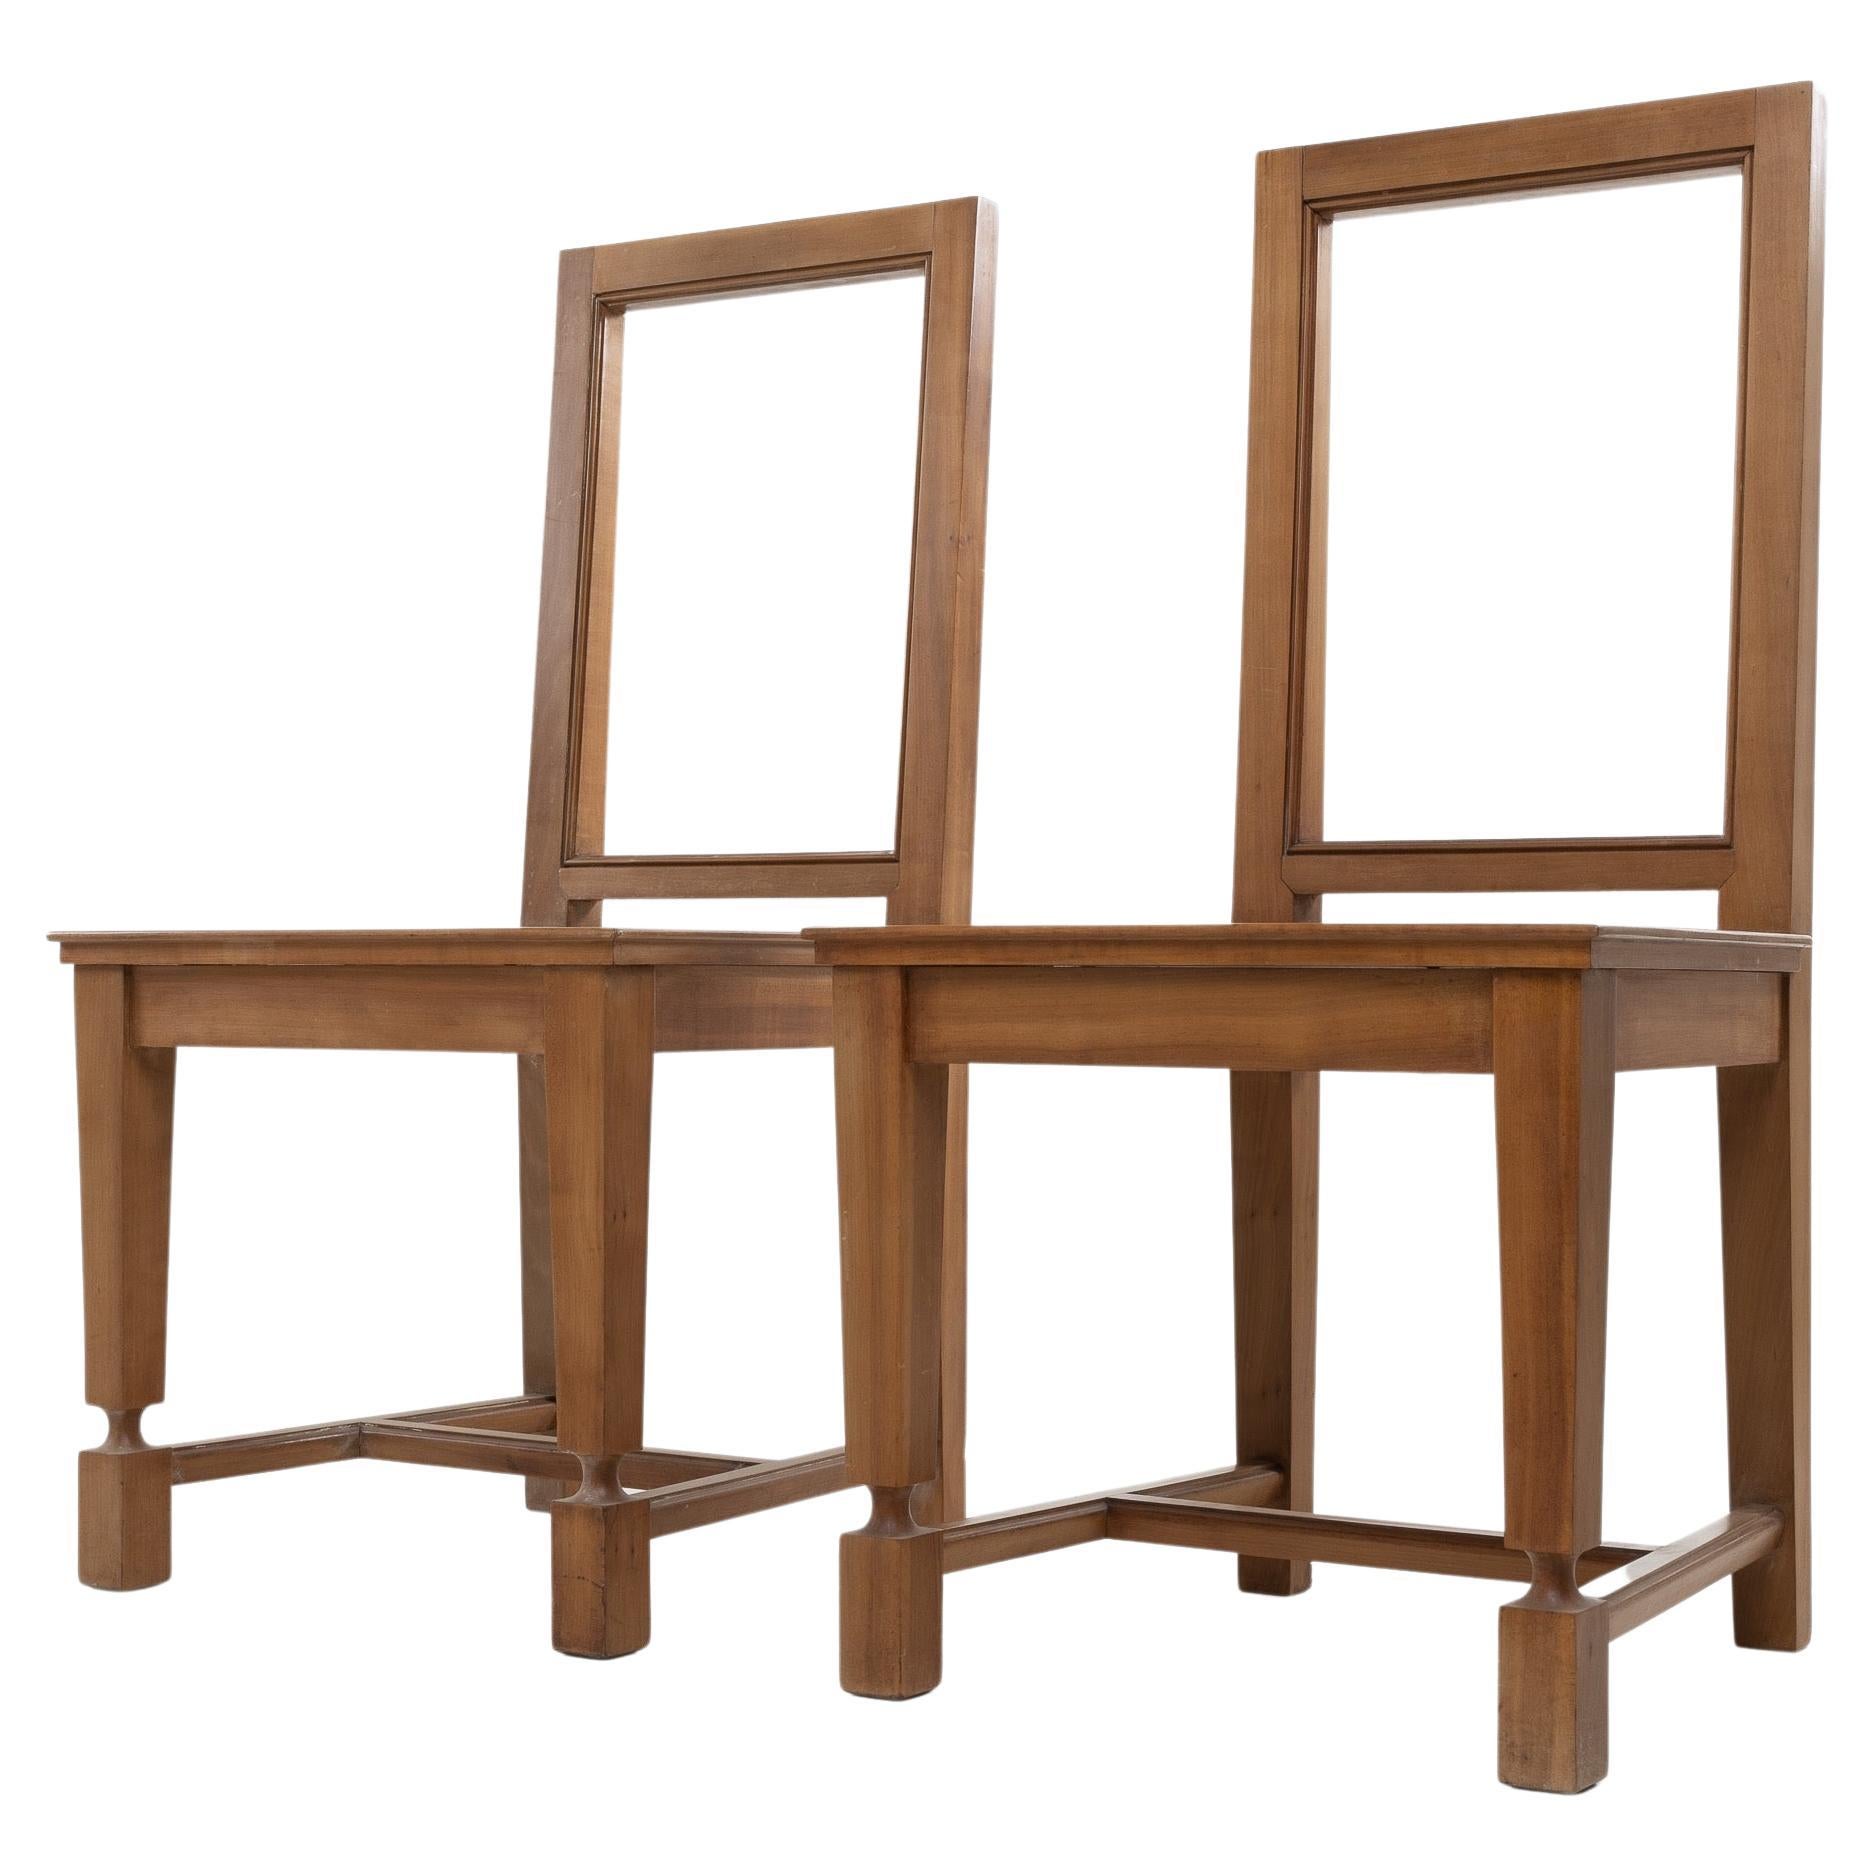 André Arbus, France, an Elegant Set of 4 Cherrywood Chairs